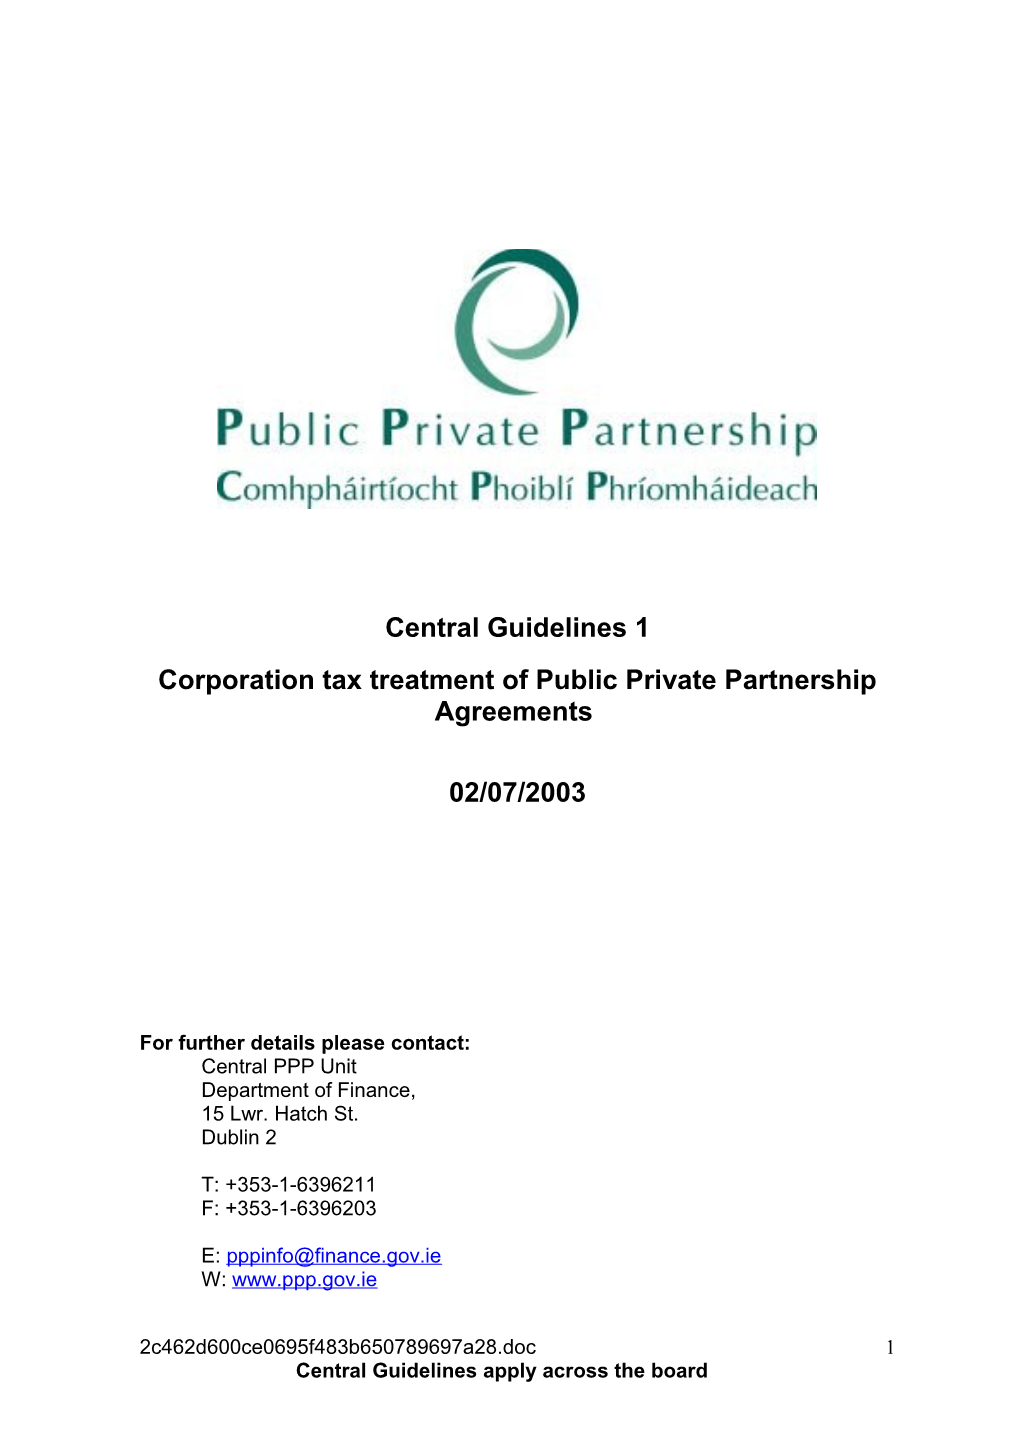 Corporation Tax Treatment of Public Private Partnership Agreements